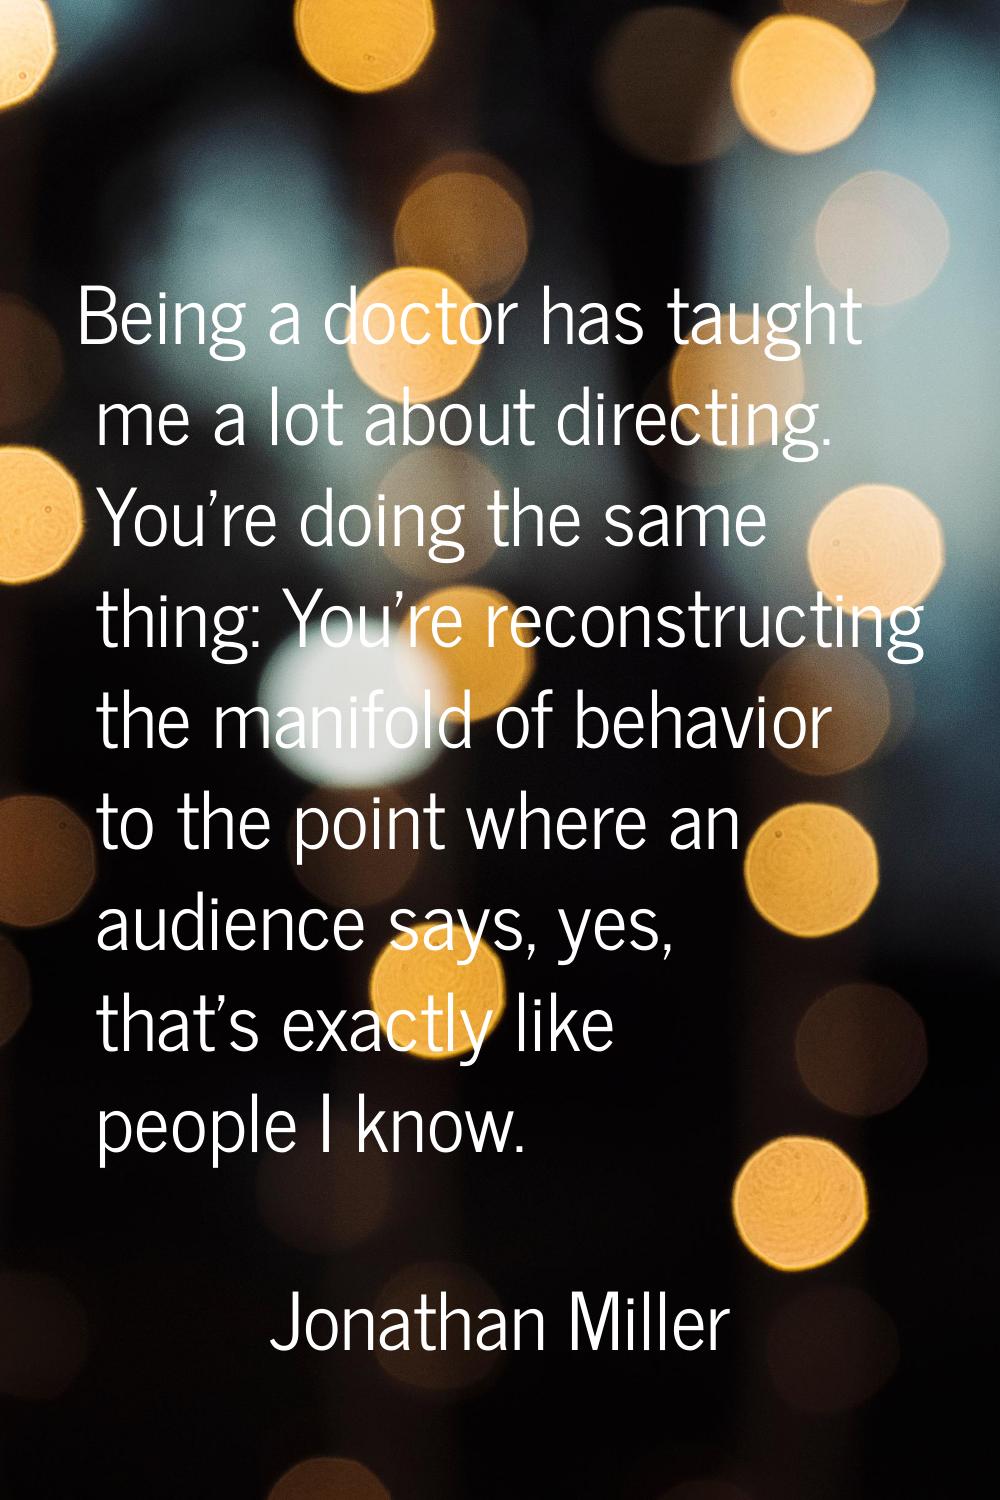 Being a doctor has taught me a lot about directing. You're doing the same thing: You're reconstruct